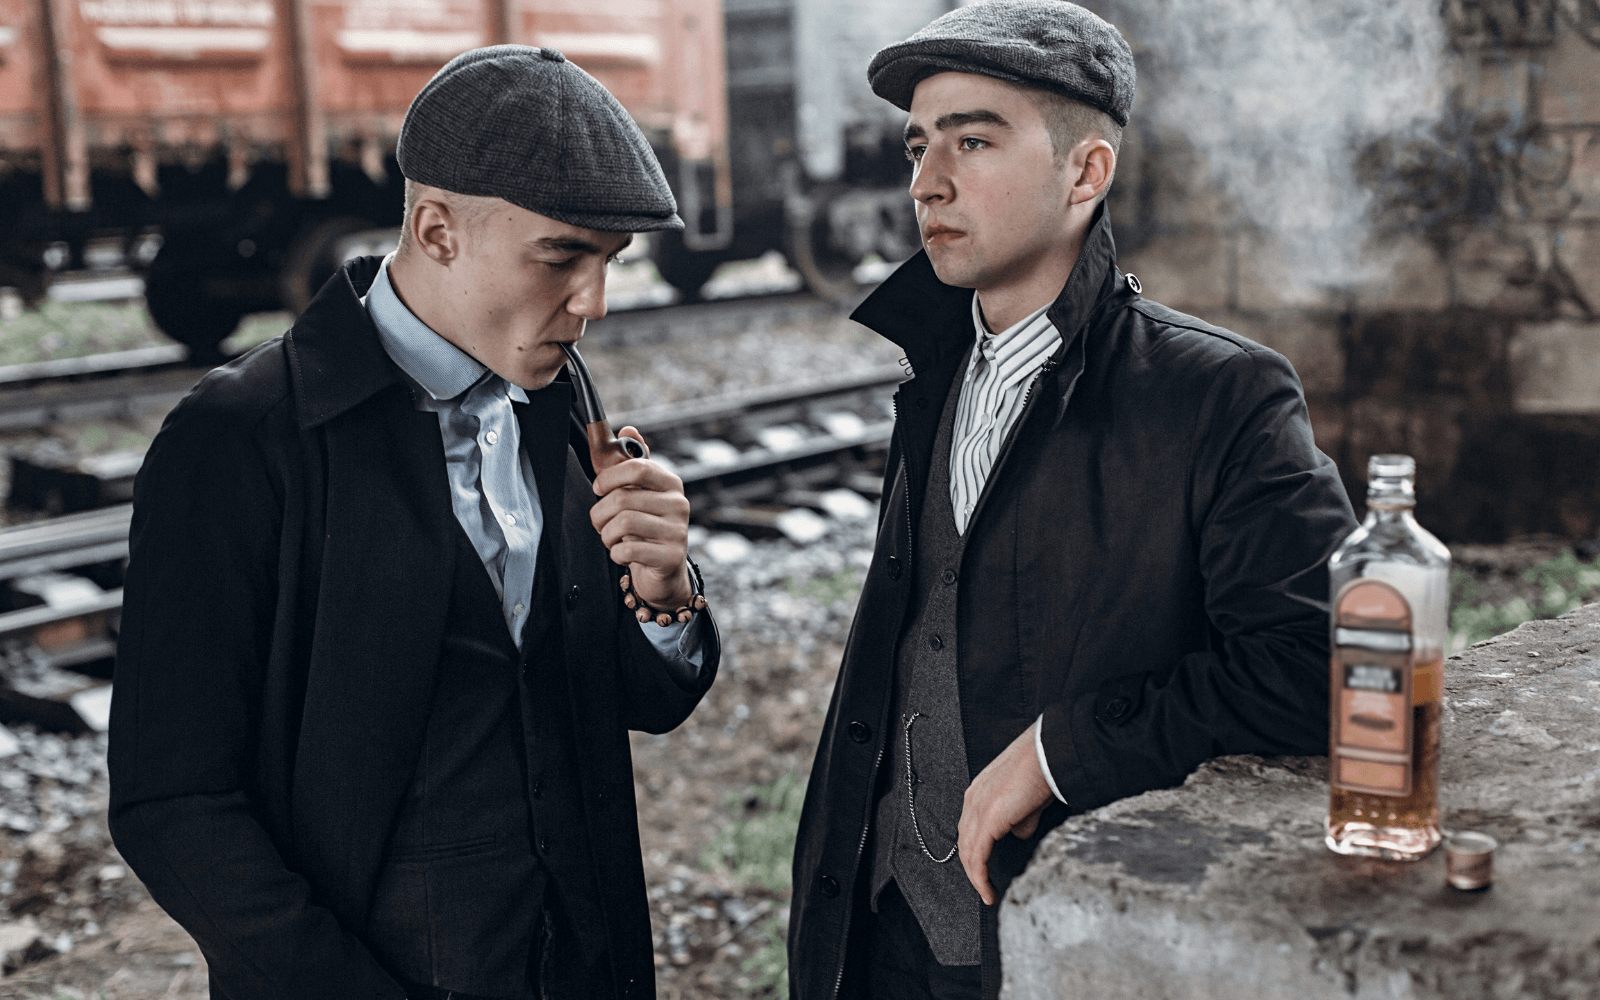 A photo from the TV series, Peaky Blinders showing 2 of the actors wearing flat caps.